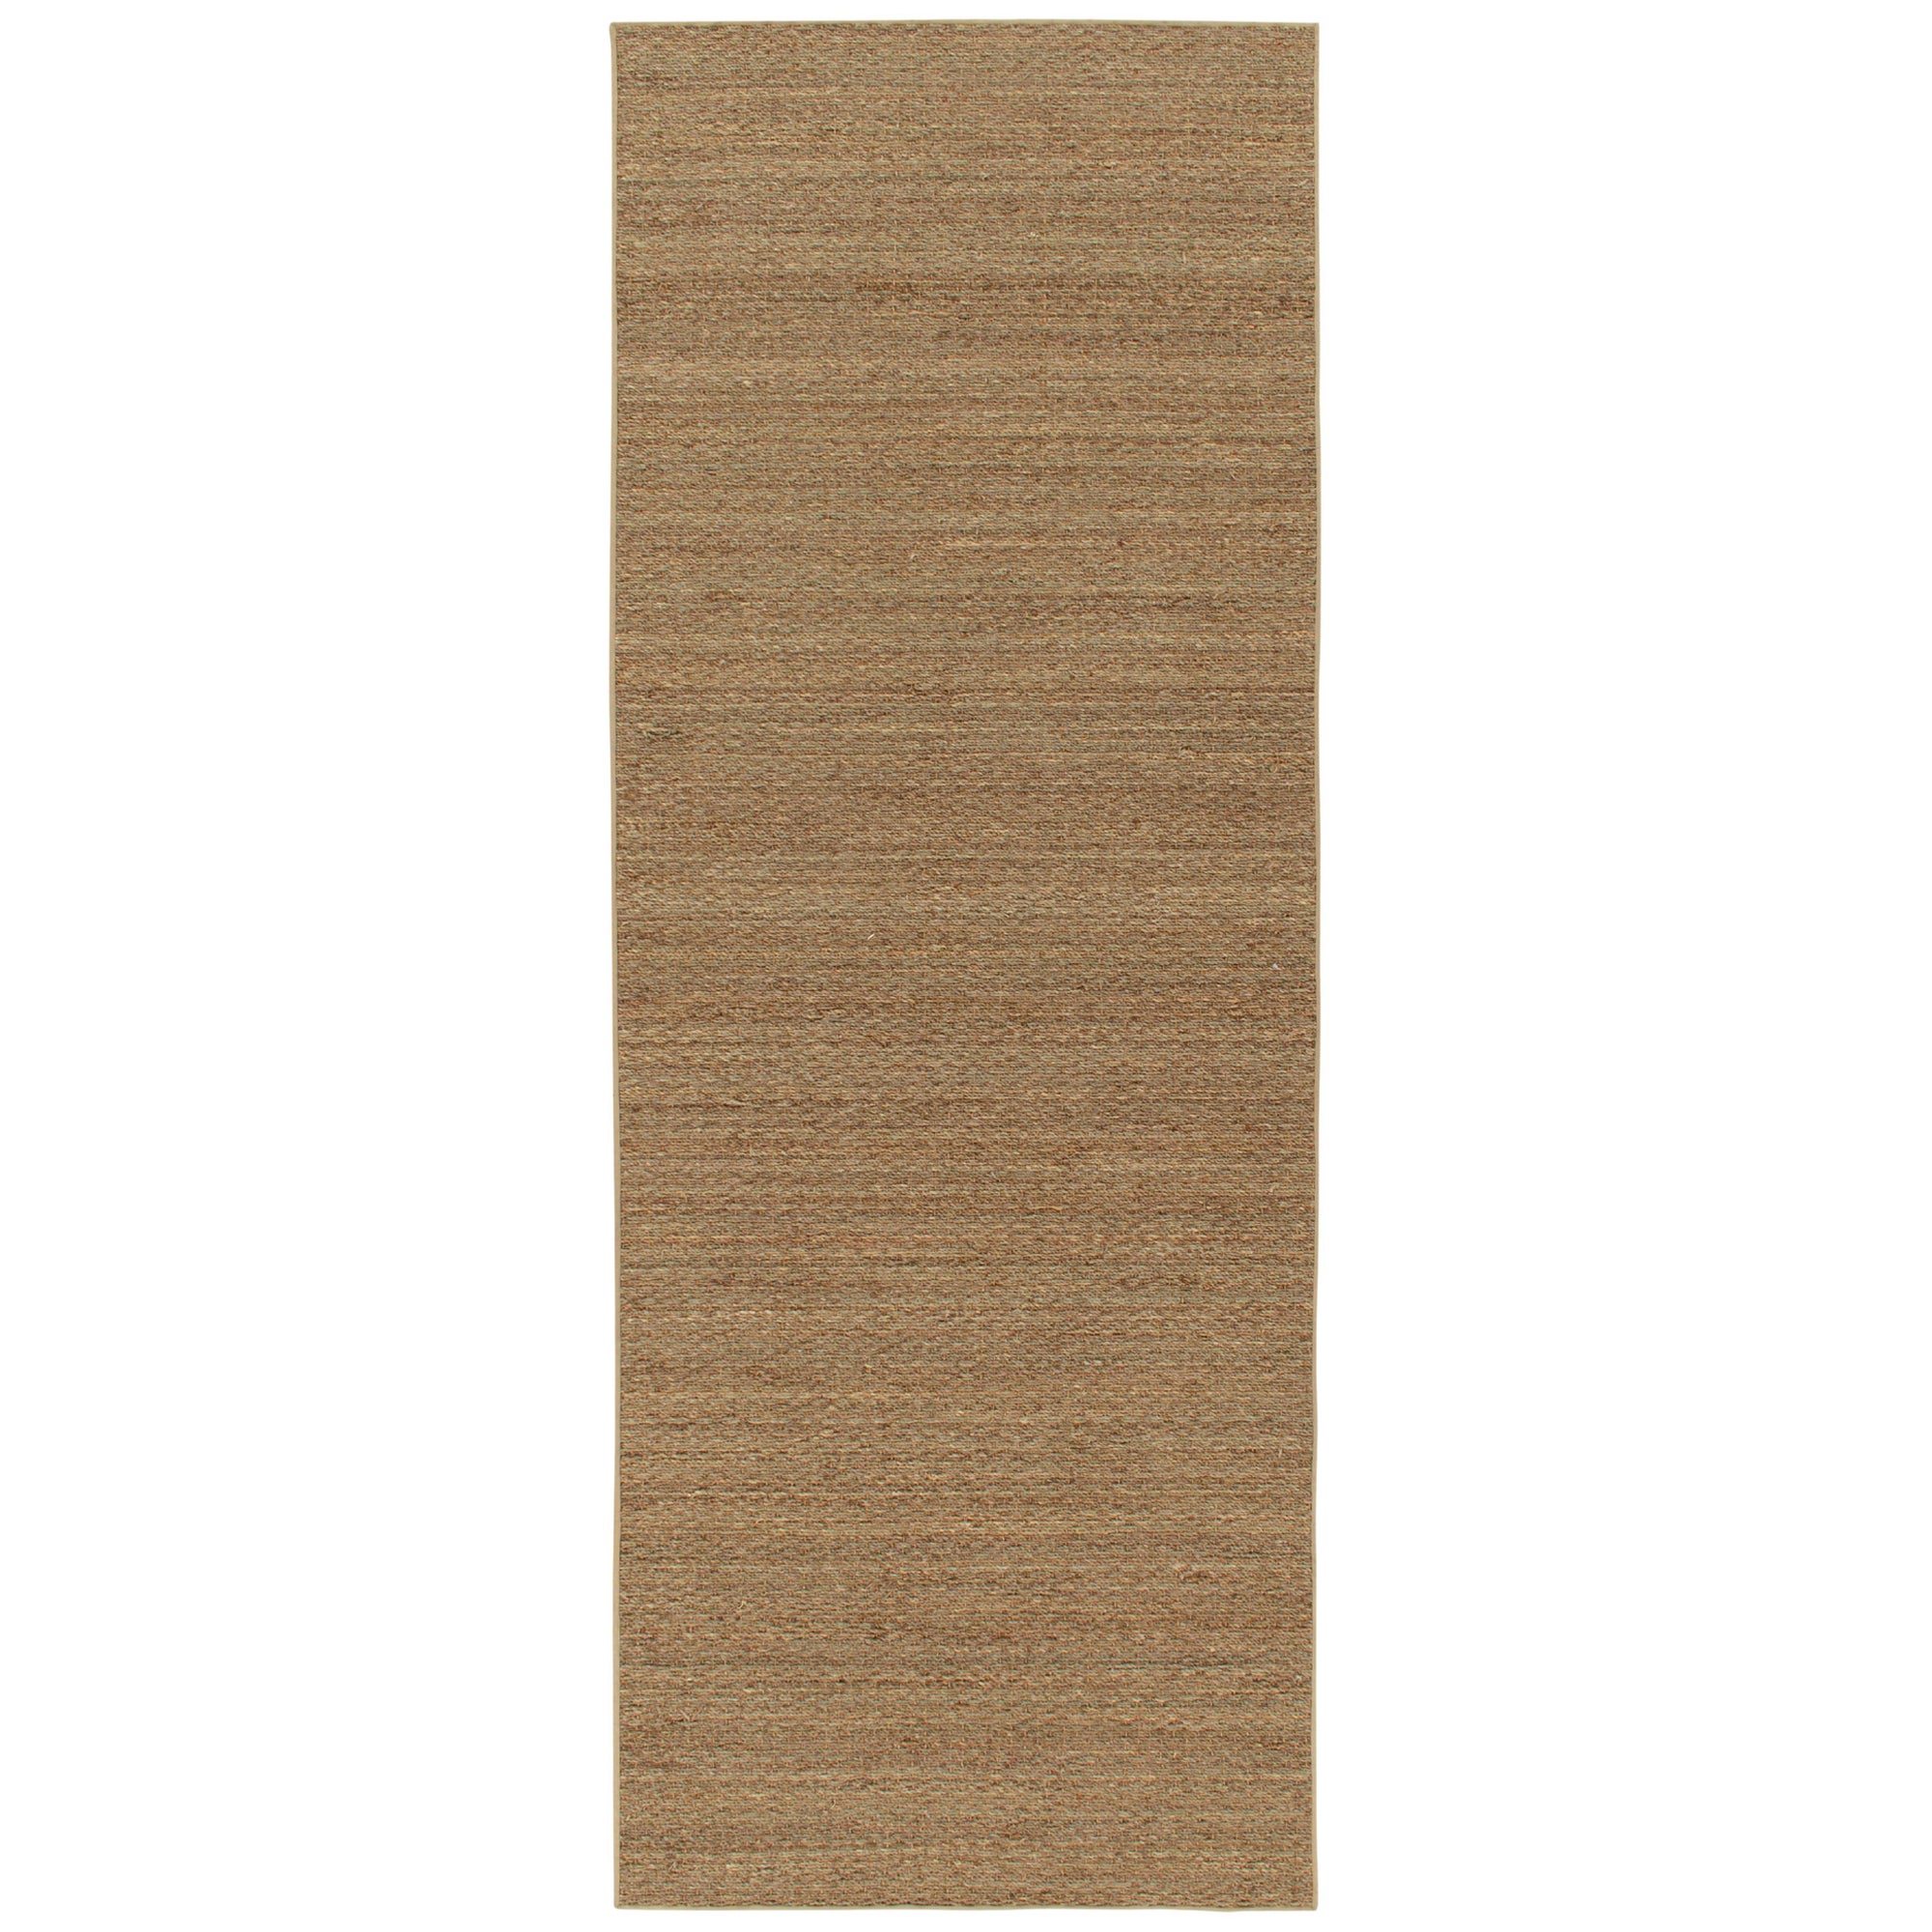 Rug & Kilim's Contemporary Style Hemp Runner in Solid Brown